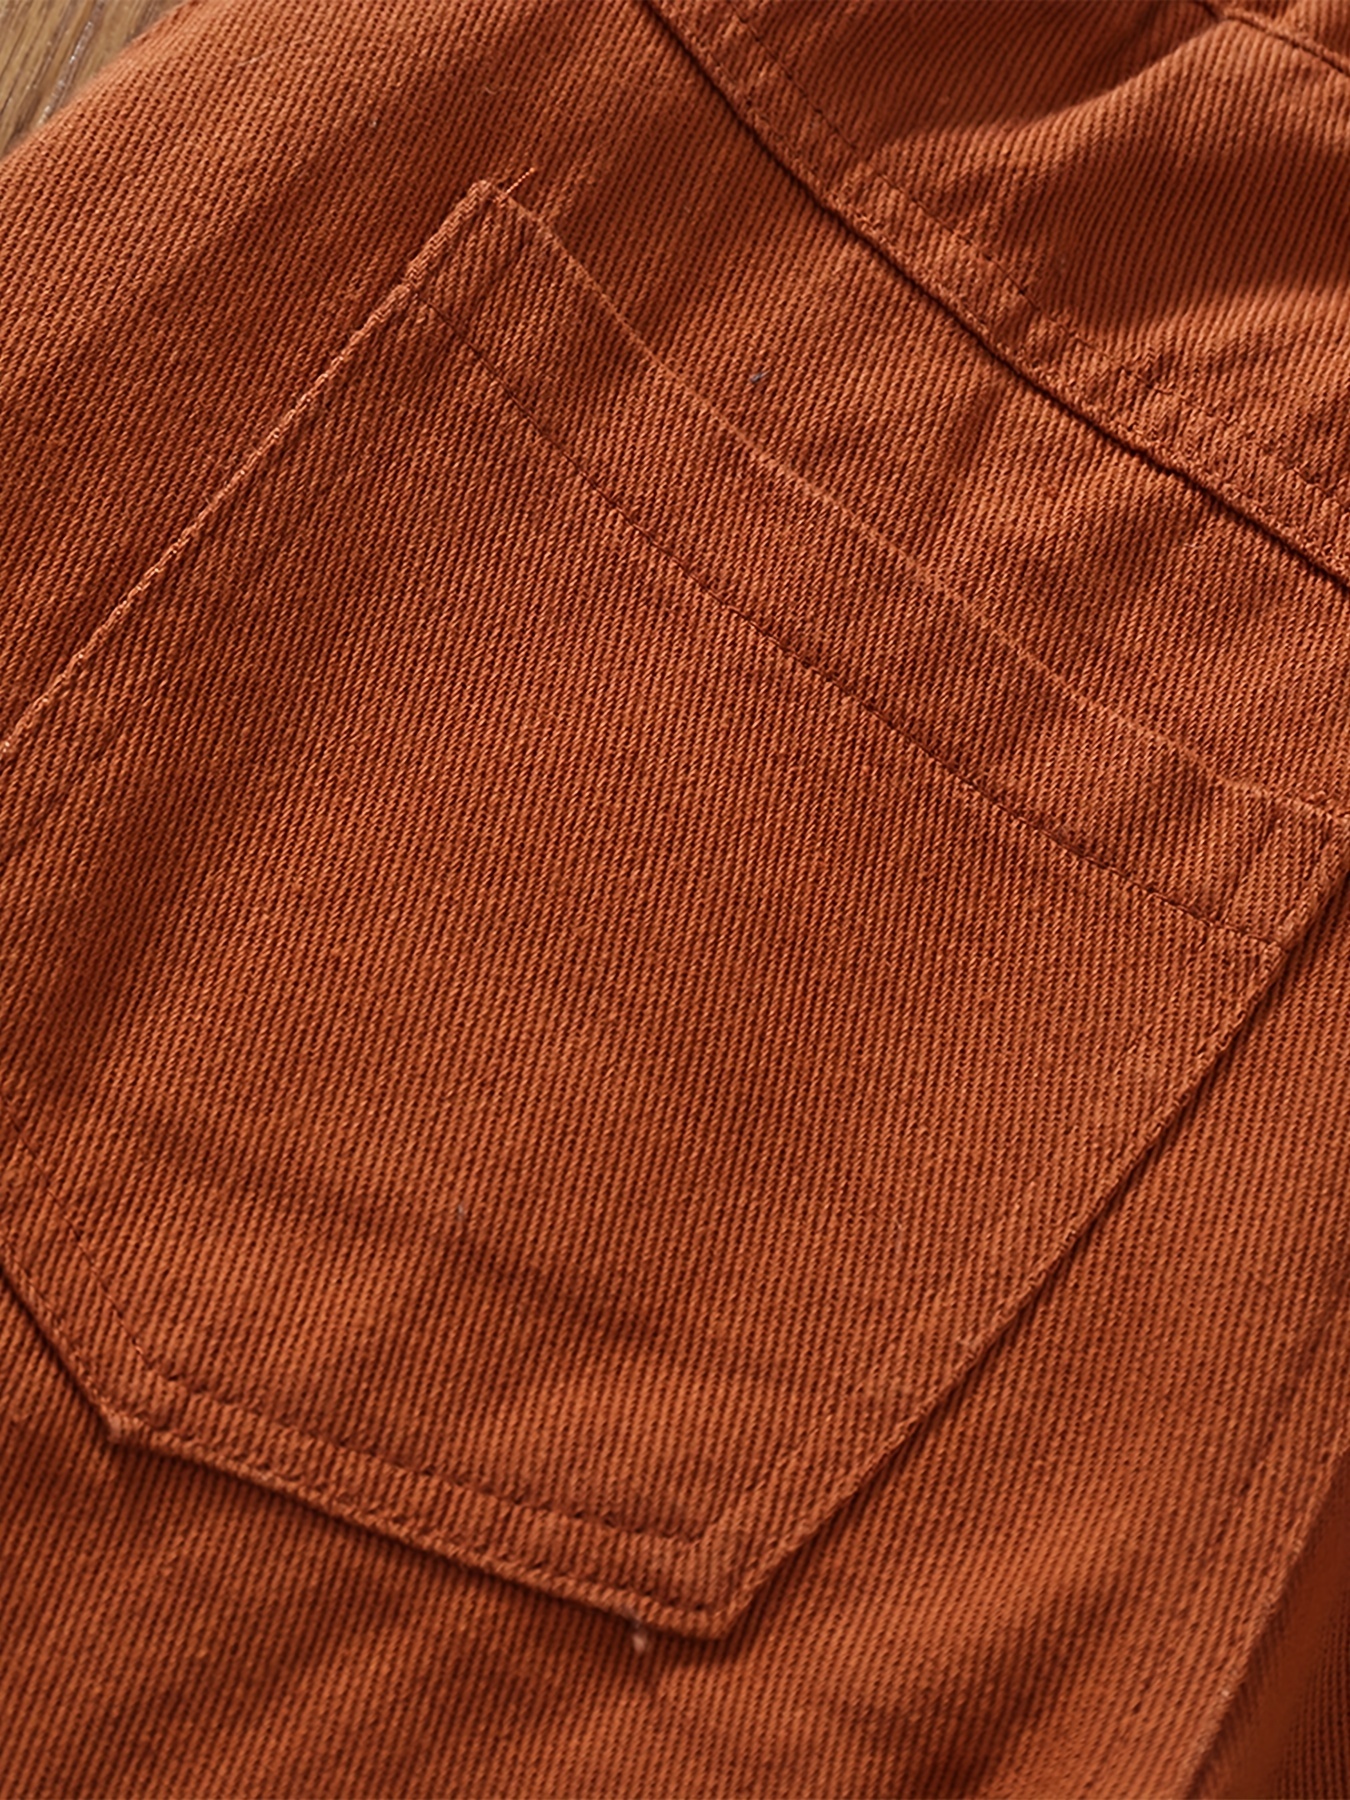 Burnt Umber Solid Cotton Woven Trousers – 11.11/eleven eleven